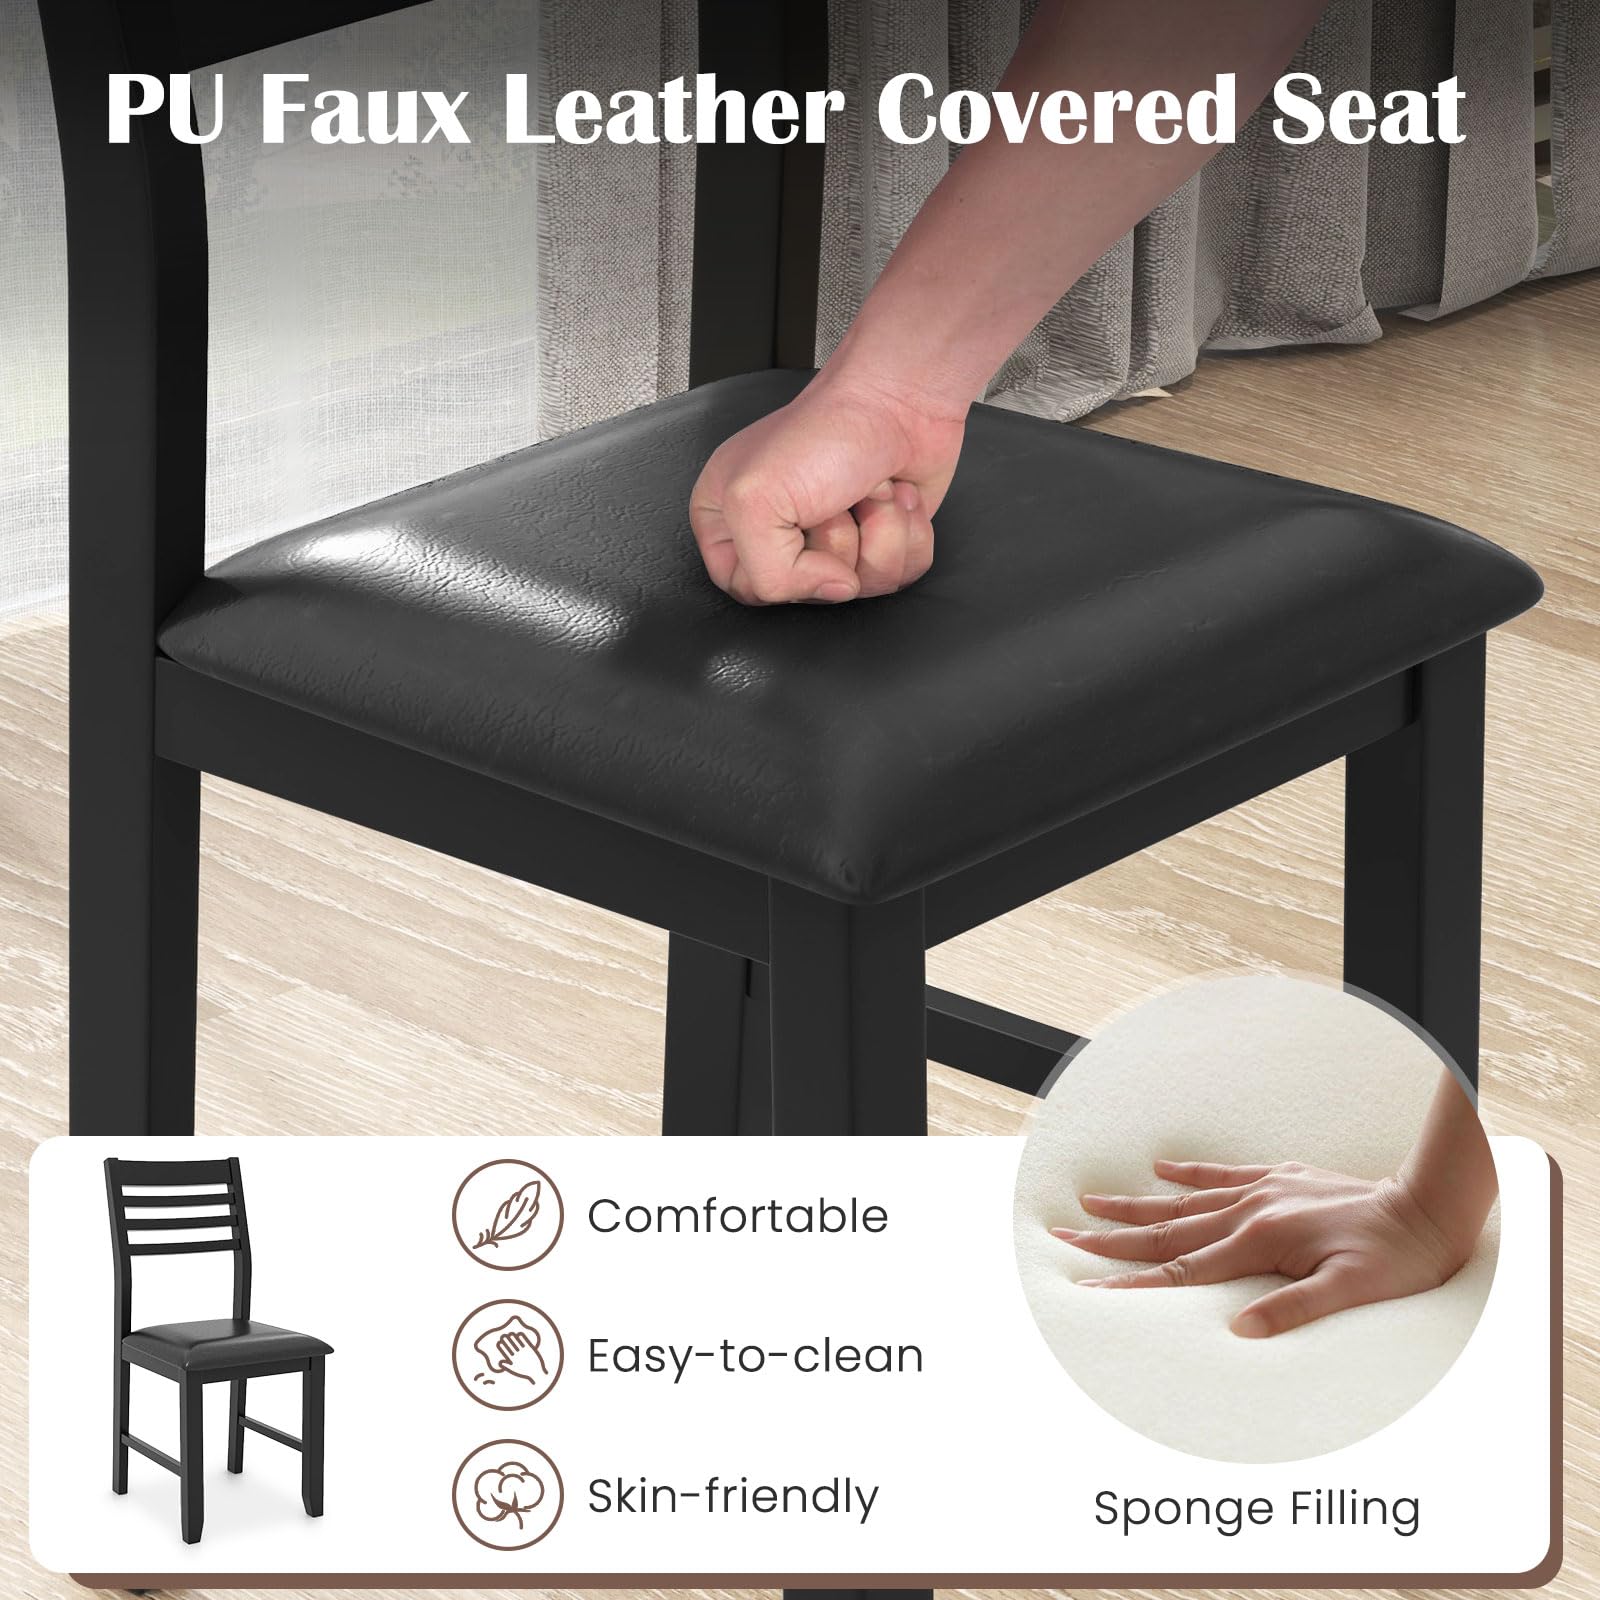 Giantex Set of 2 Dining Chairs Black, Faux Leather Upholstered Kitchen Chairs w/Padded Seat & Ladder Back